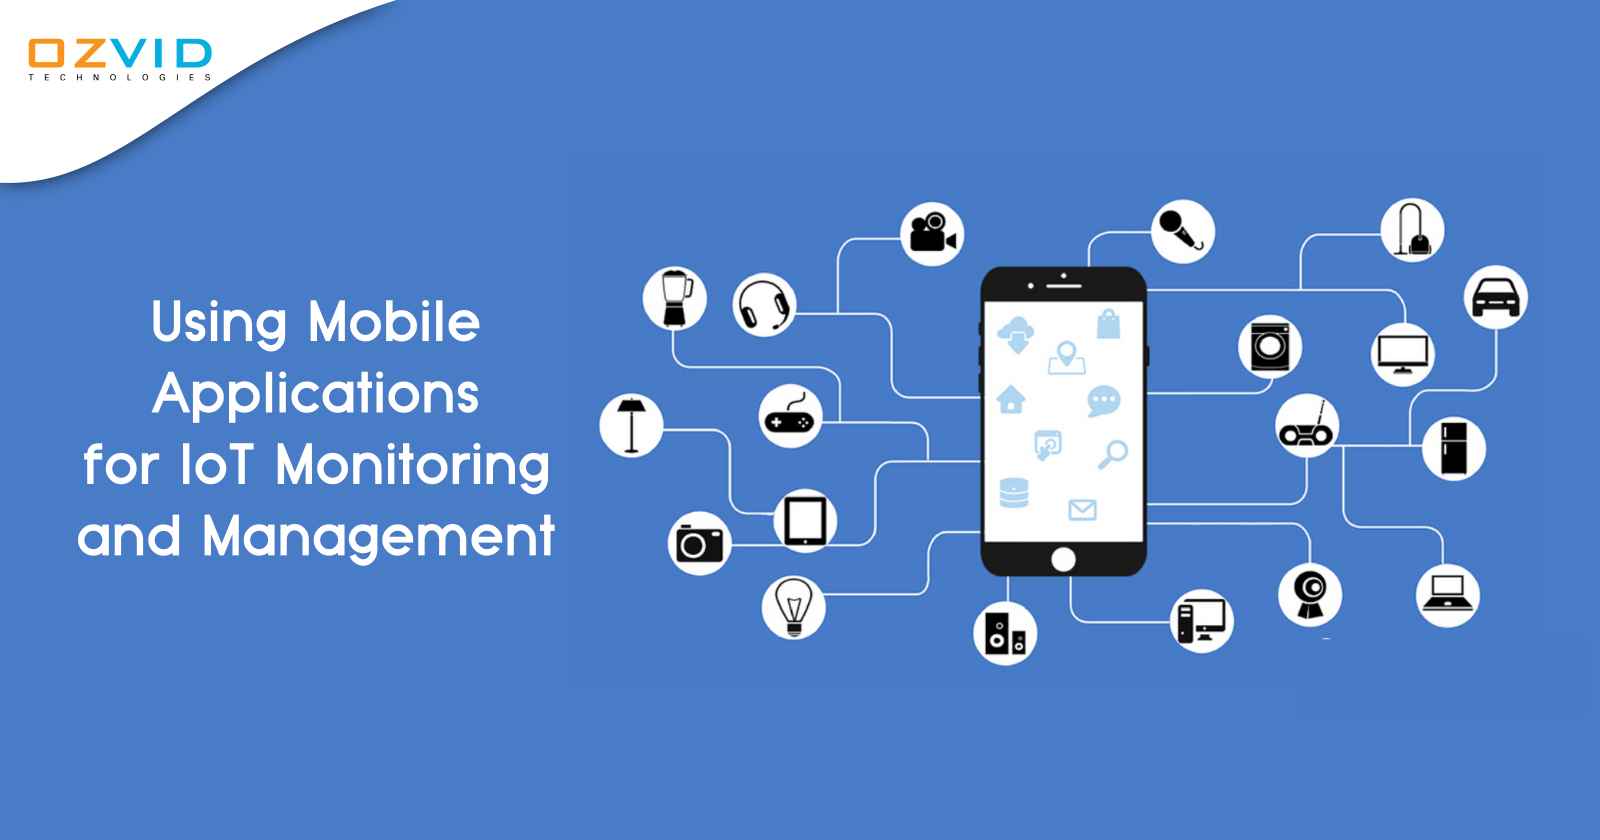 Using Mobile Applications for IoT Monitoring and Management